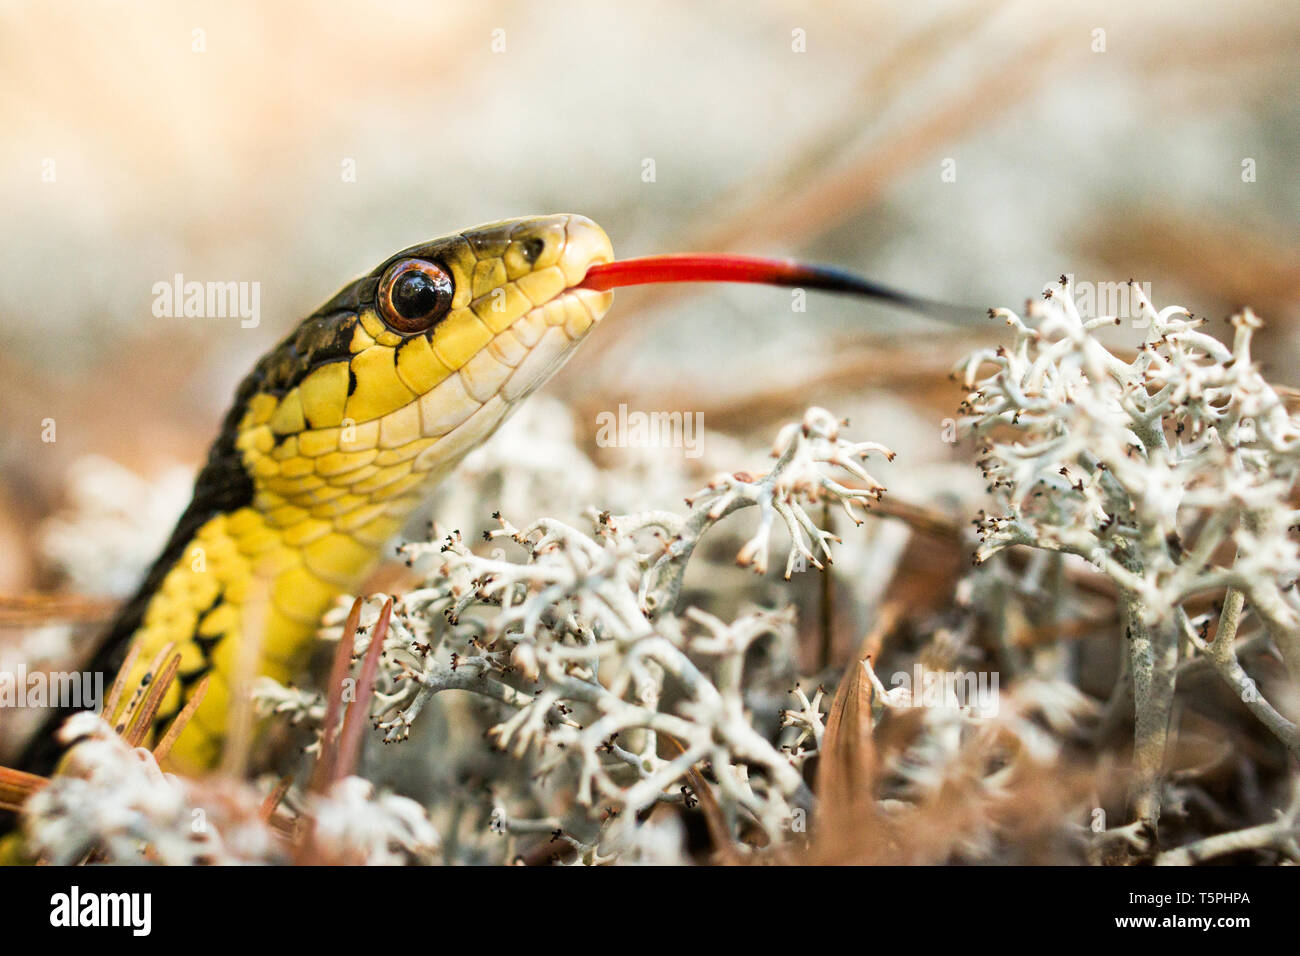 Close up of an eastern garter snake (Thamnophis sirtalis) smelling with its tongue. Stock Photo